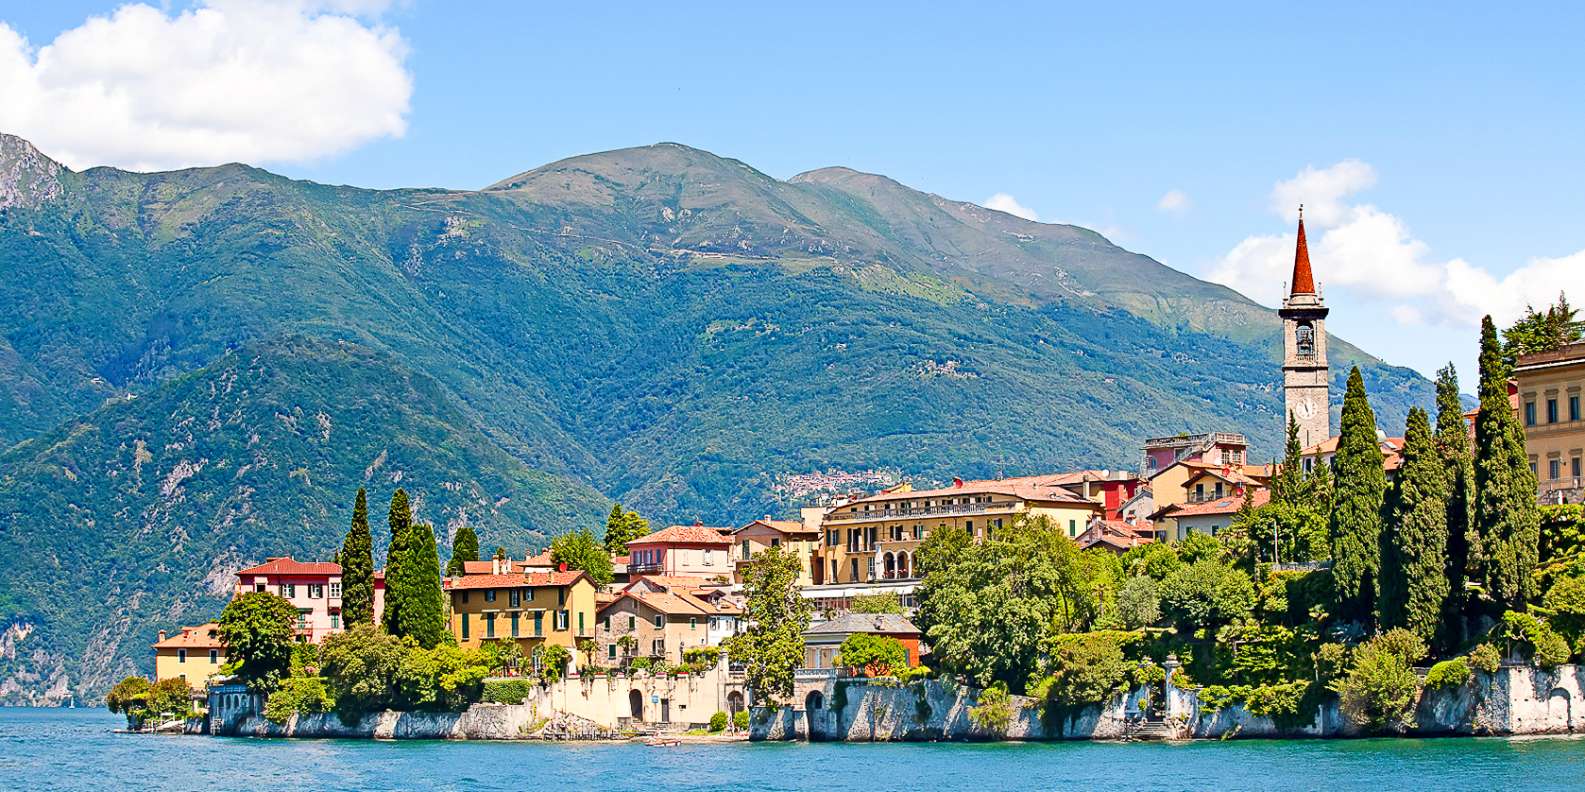 What to do in Lugano